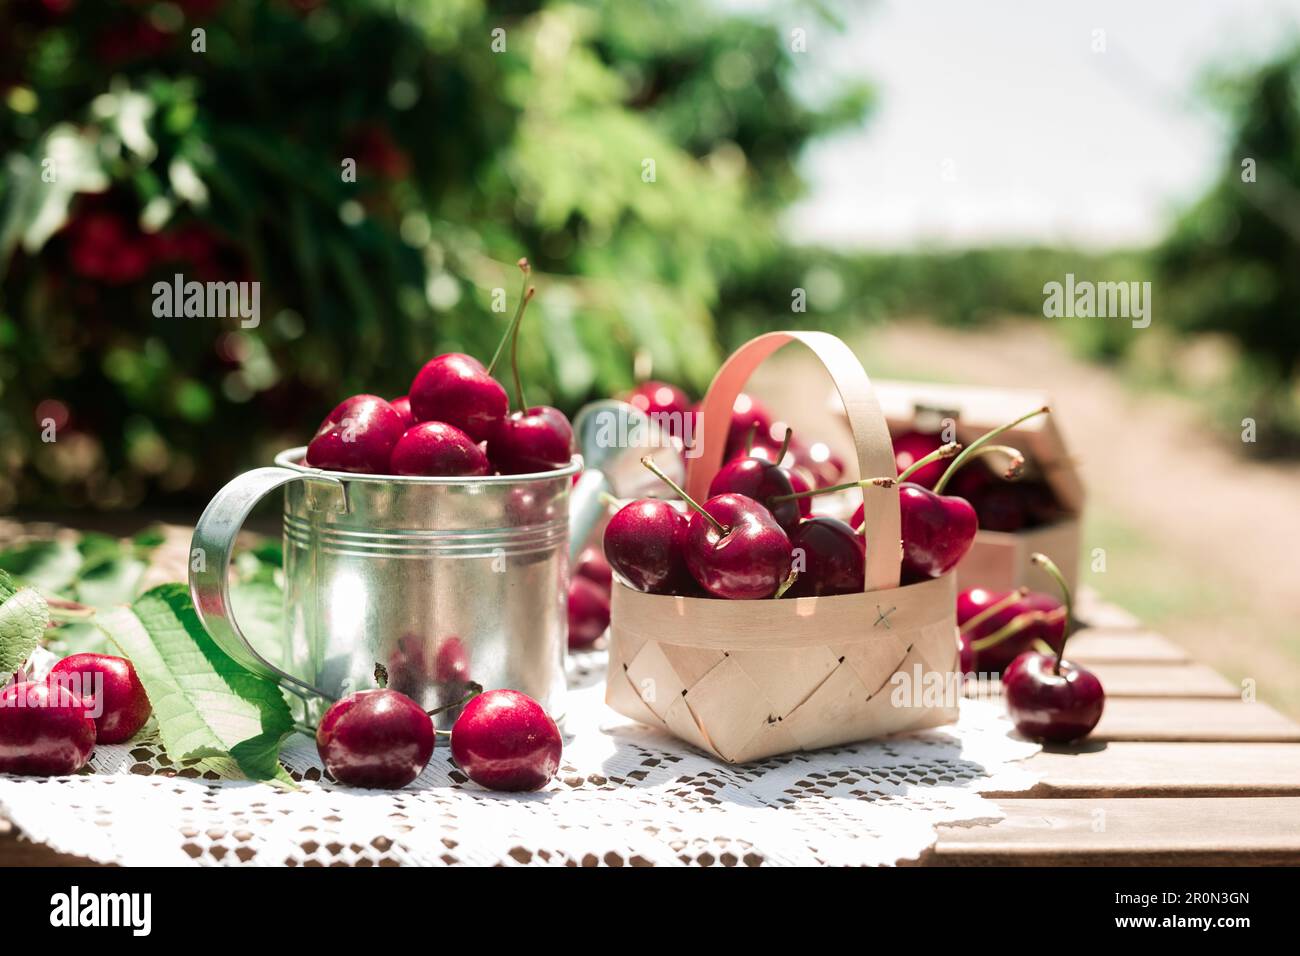 harvest of juicy cherry berries on table against background of cherry trees with cherry berries Stock Photo